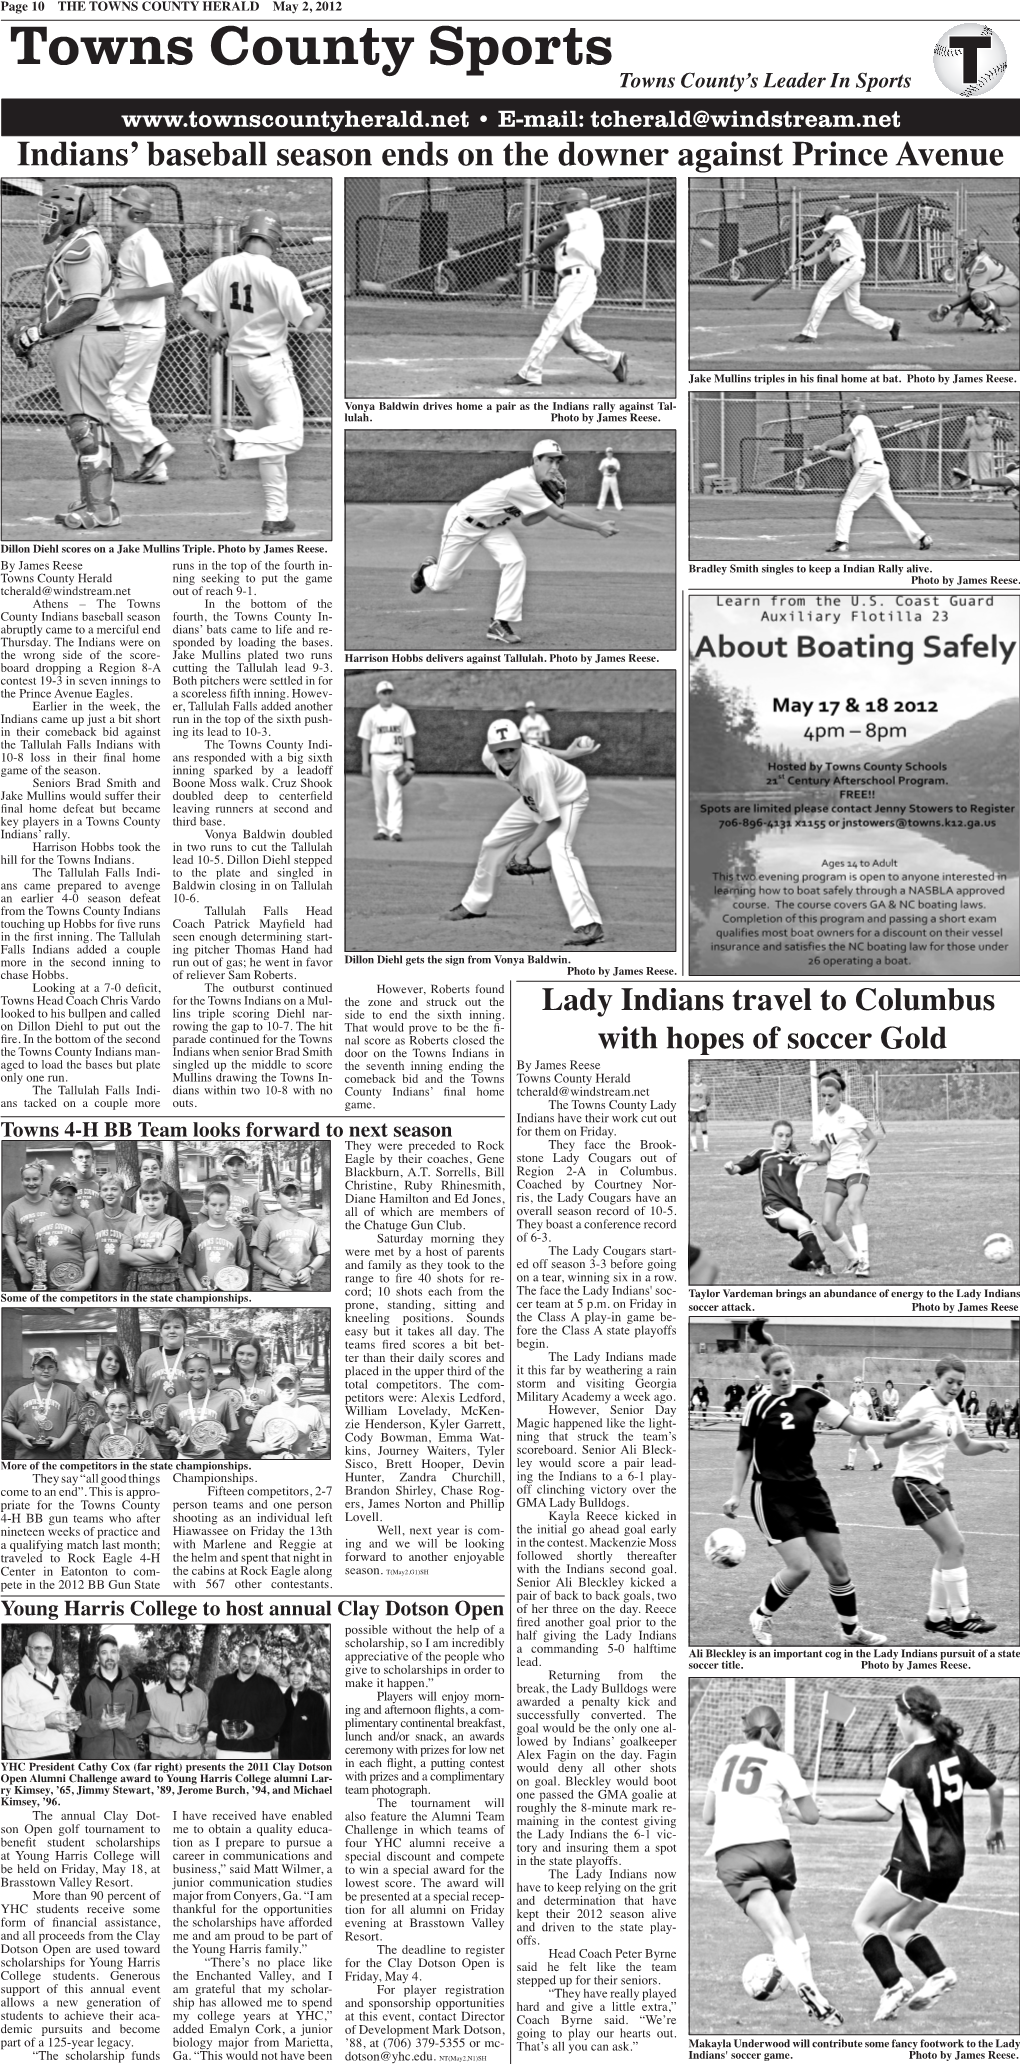 Sports Page 1